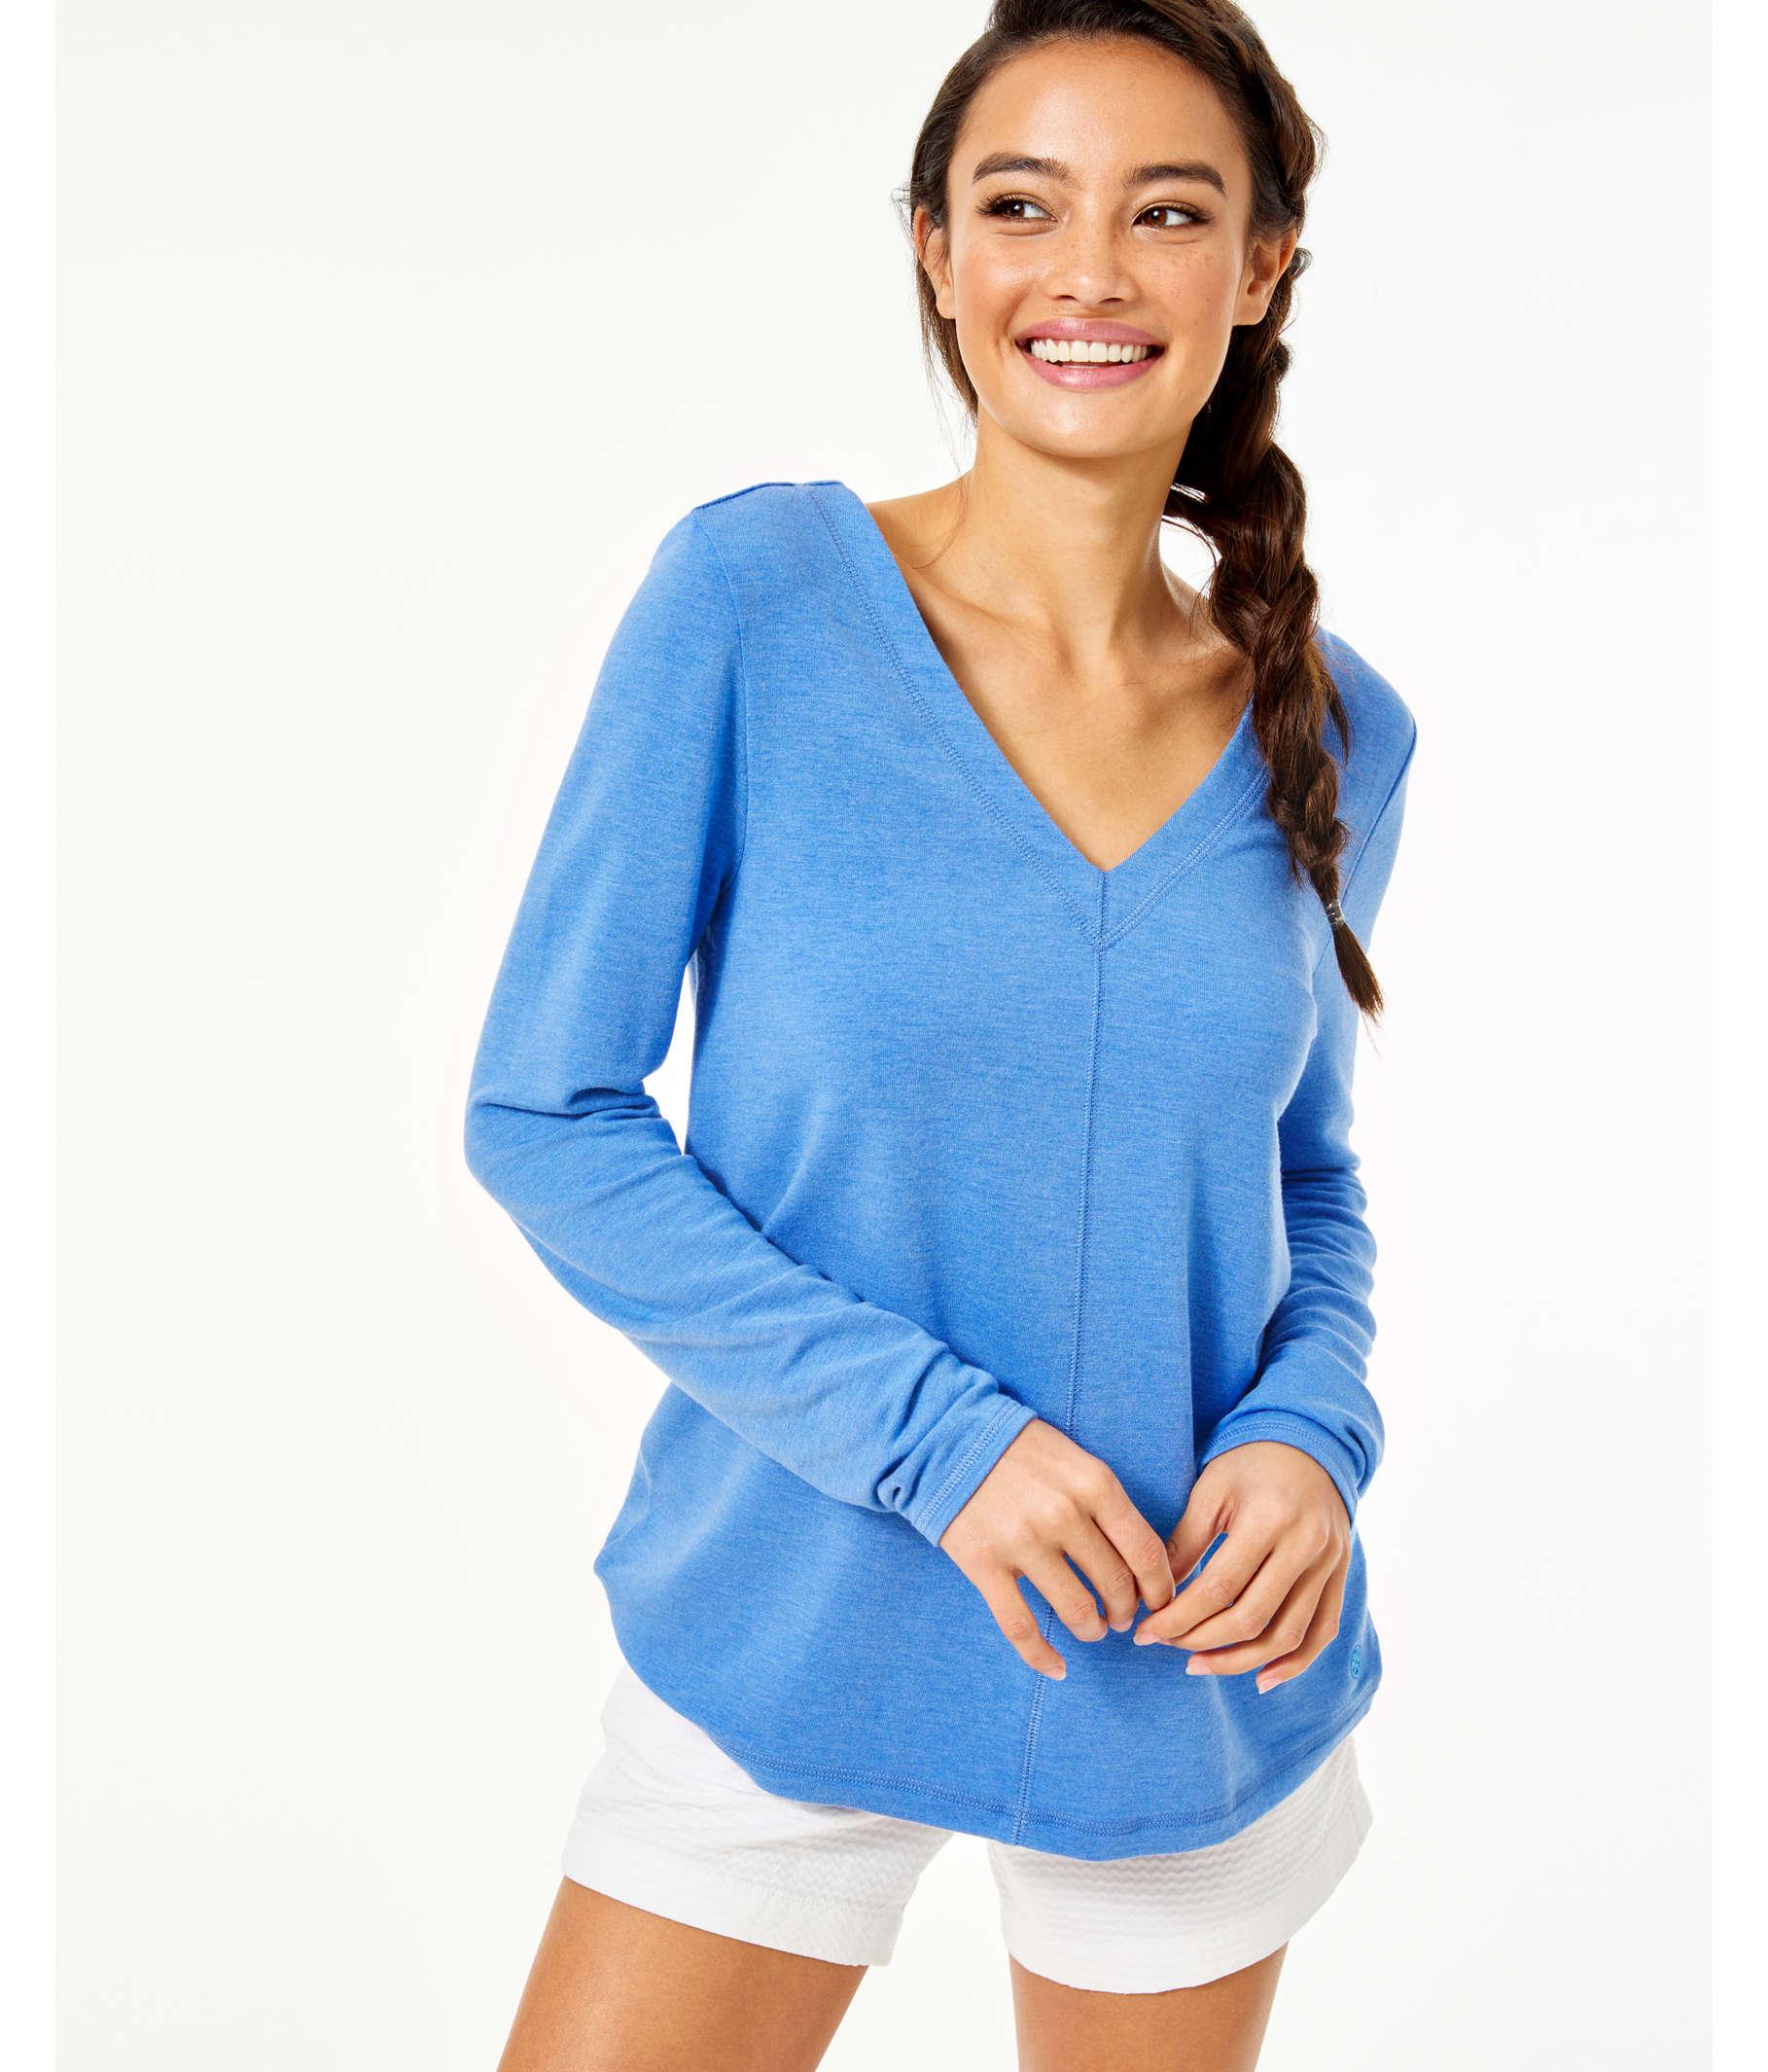 Lilly Pulitzer Luxletic Areli Pullover in Blue - Lyst